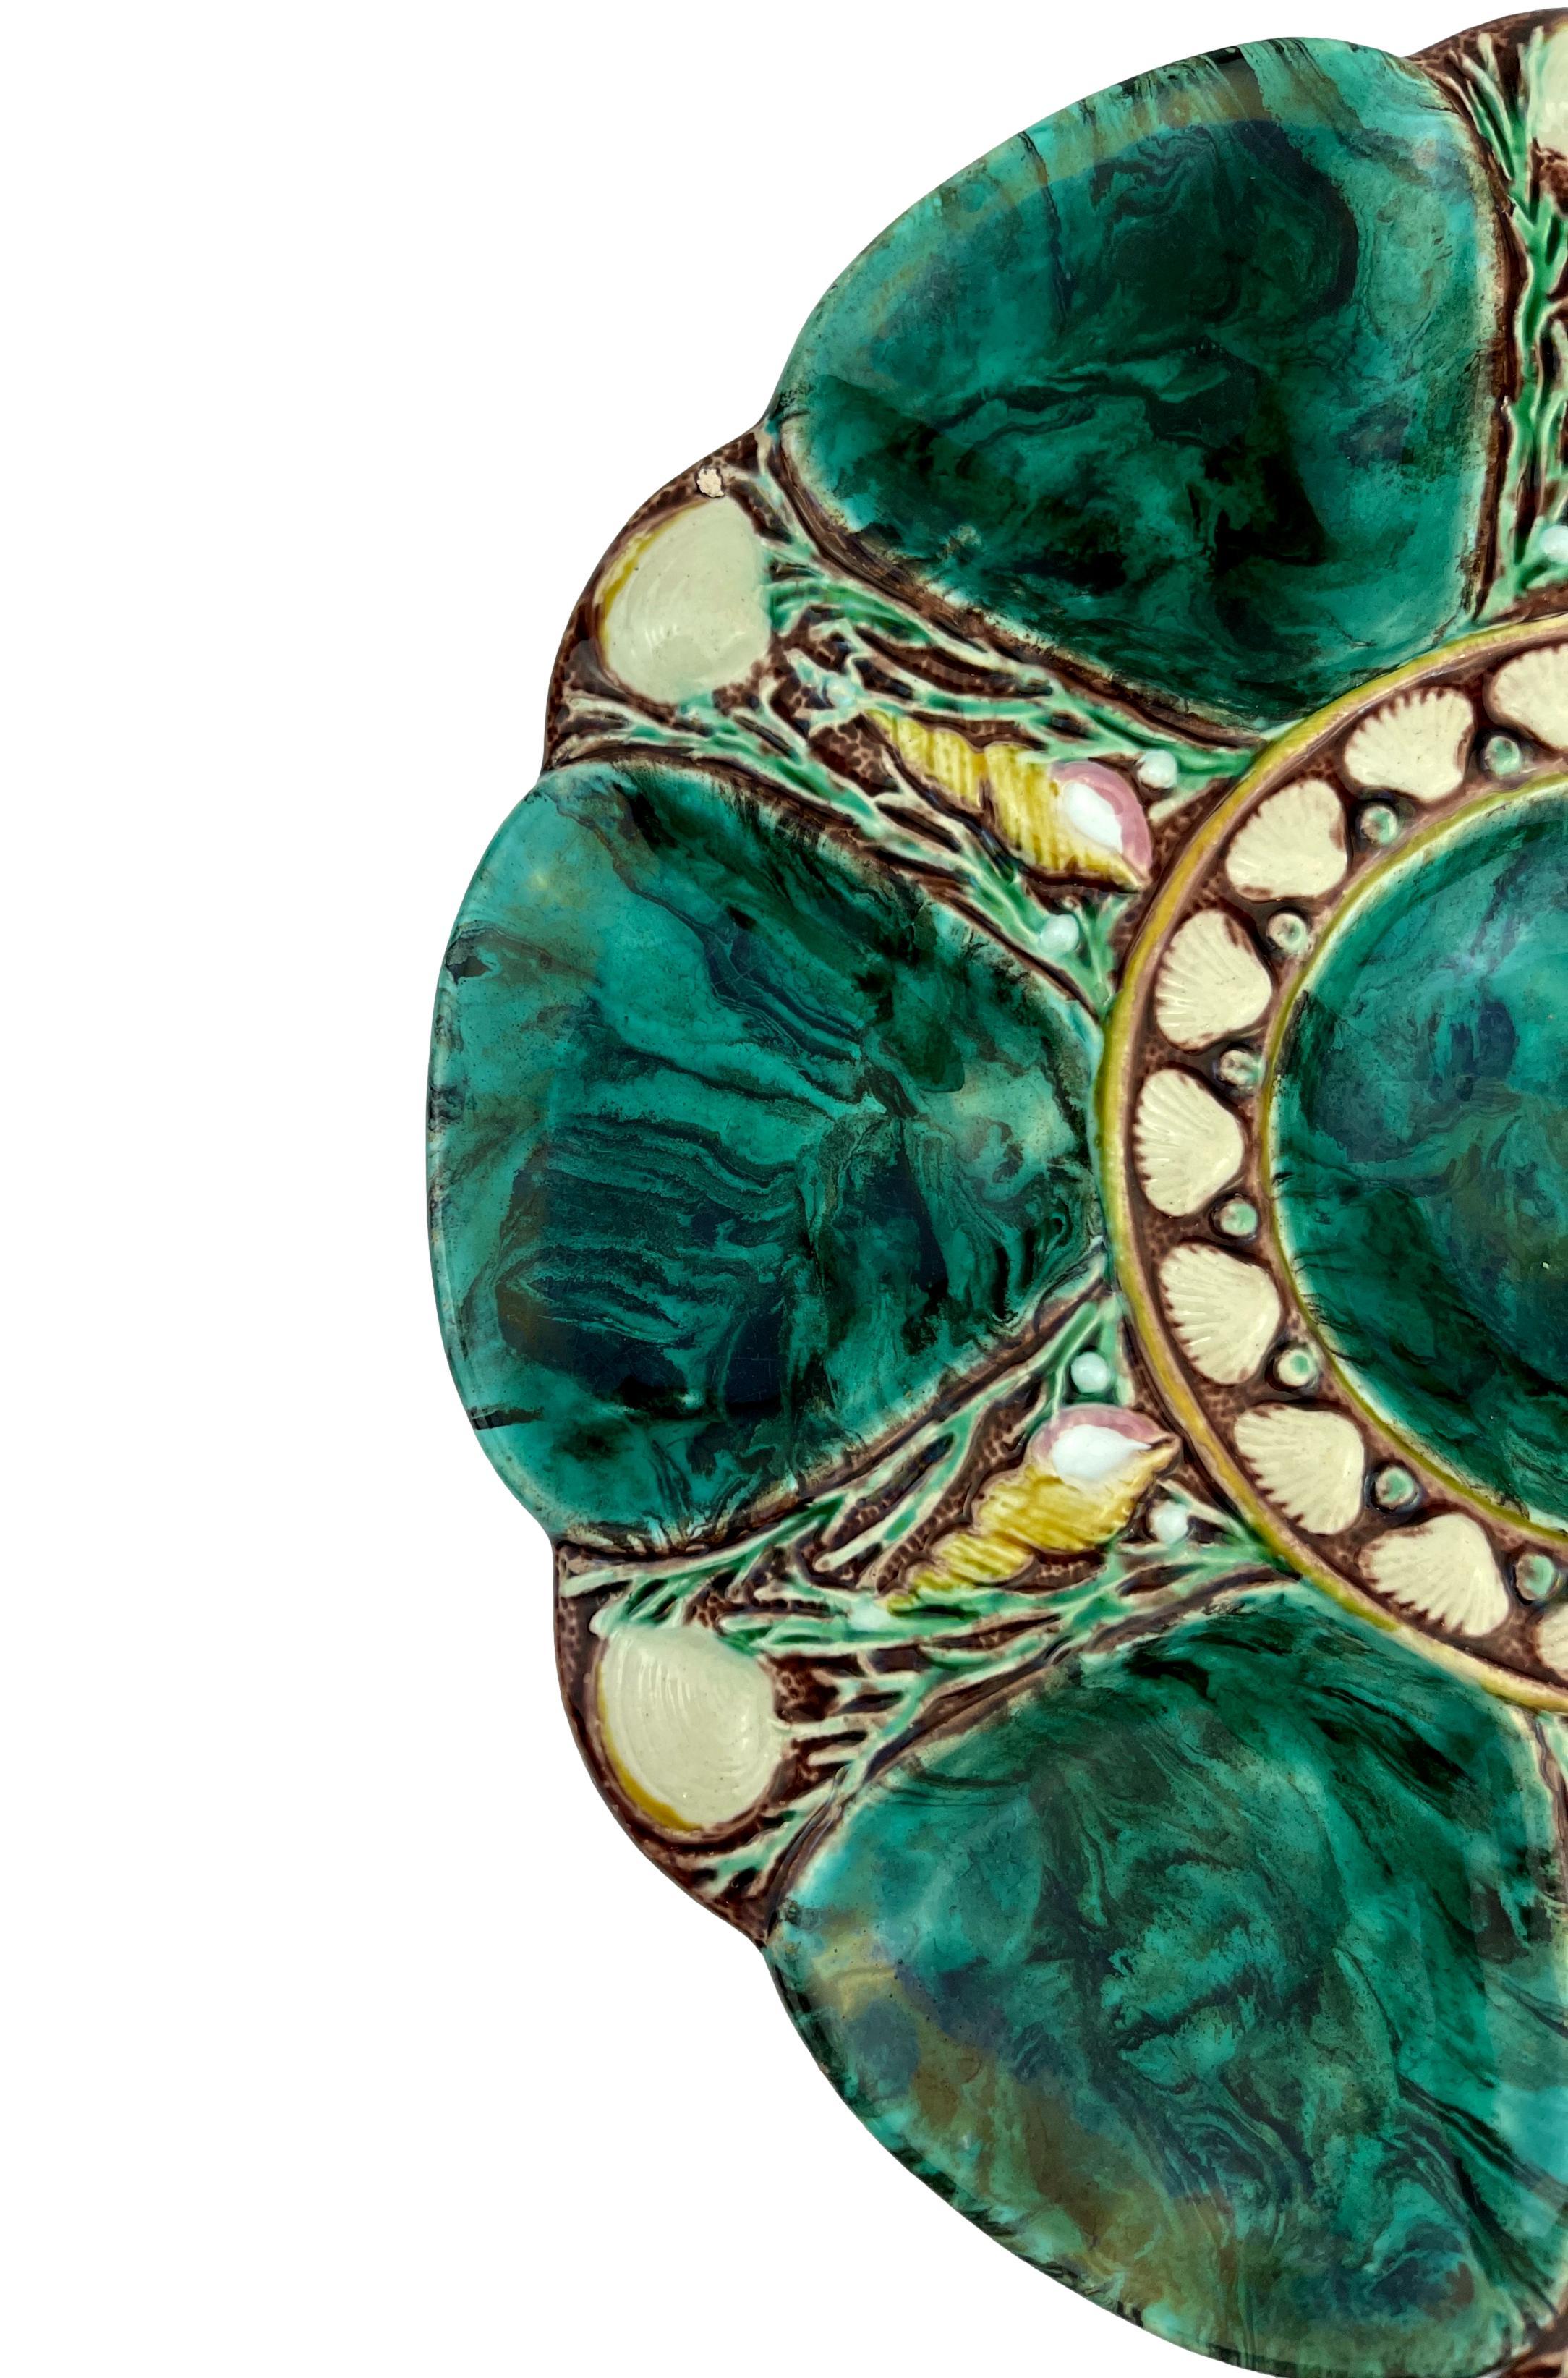 Minton majolica six-well oyster plate glazed in simulated malachite, the reverse with impressed and molded marks: 'MINTON,' and Minton Date Cypher for 1873, molded British Registry Lozenge for 1867, the year the design was registered, and impressed